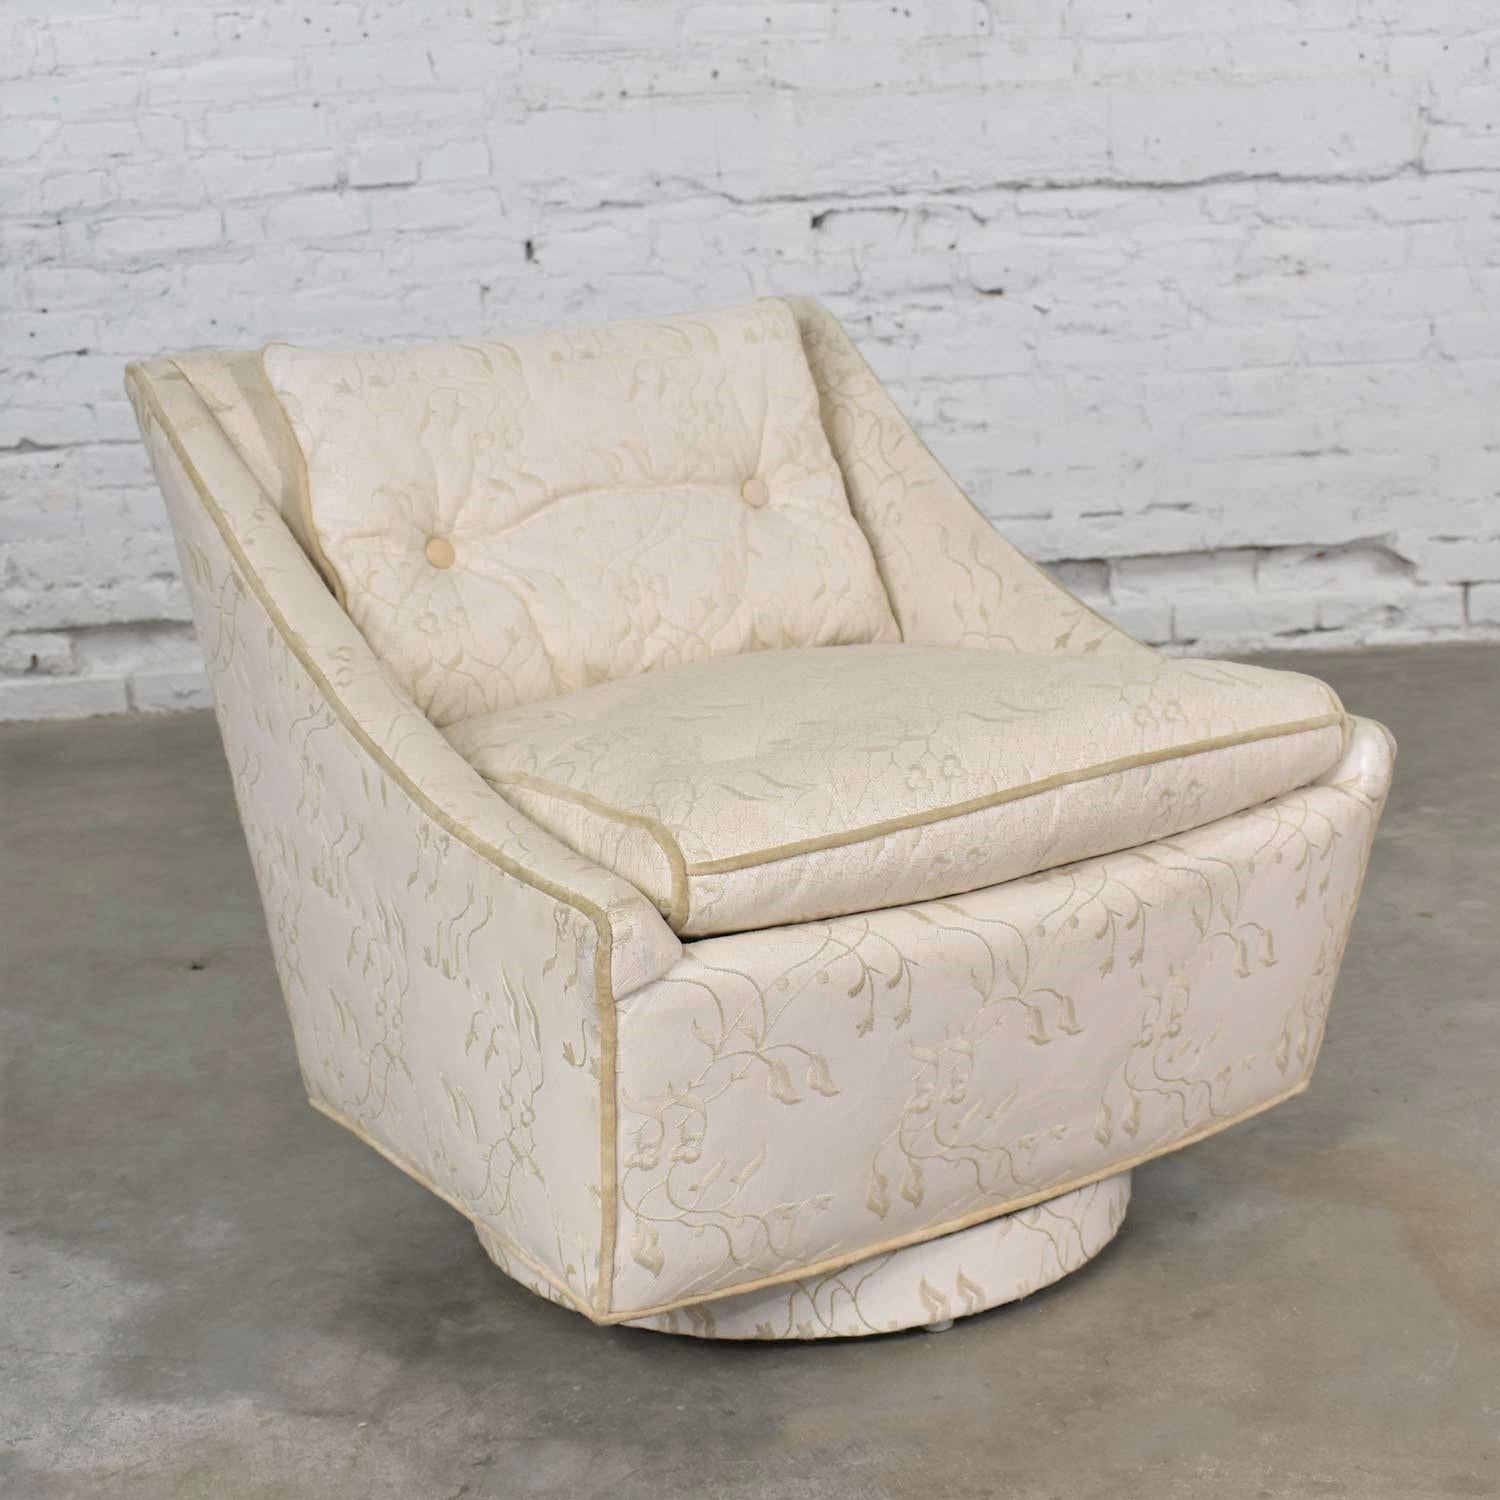 Vintage Art Deco Petite White Swivel Chair Embroidered Leather by Oxford Ltd. For Sale 1